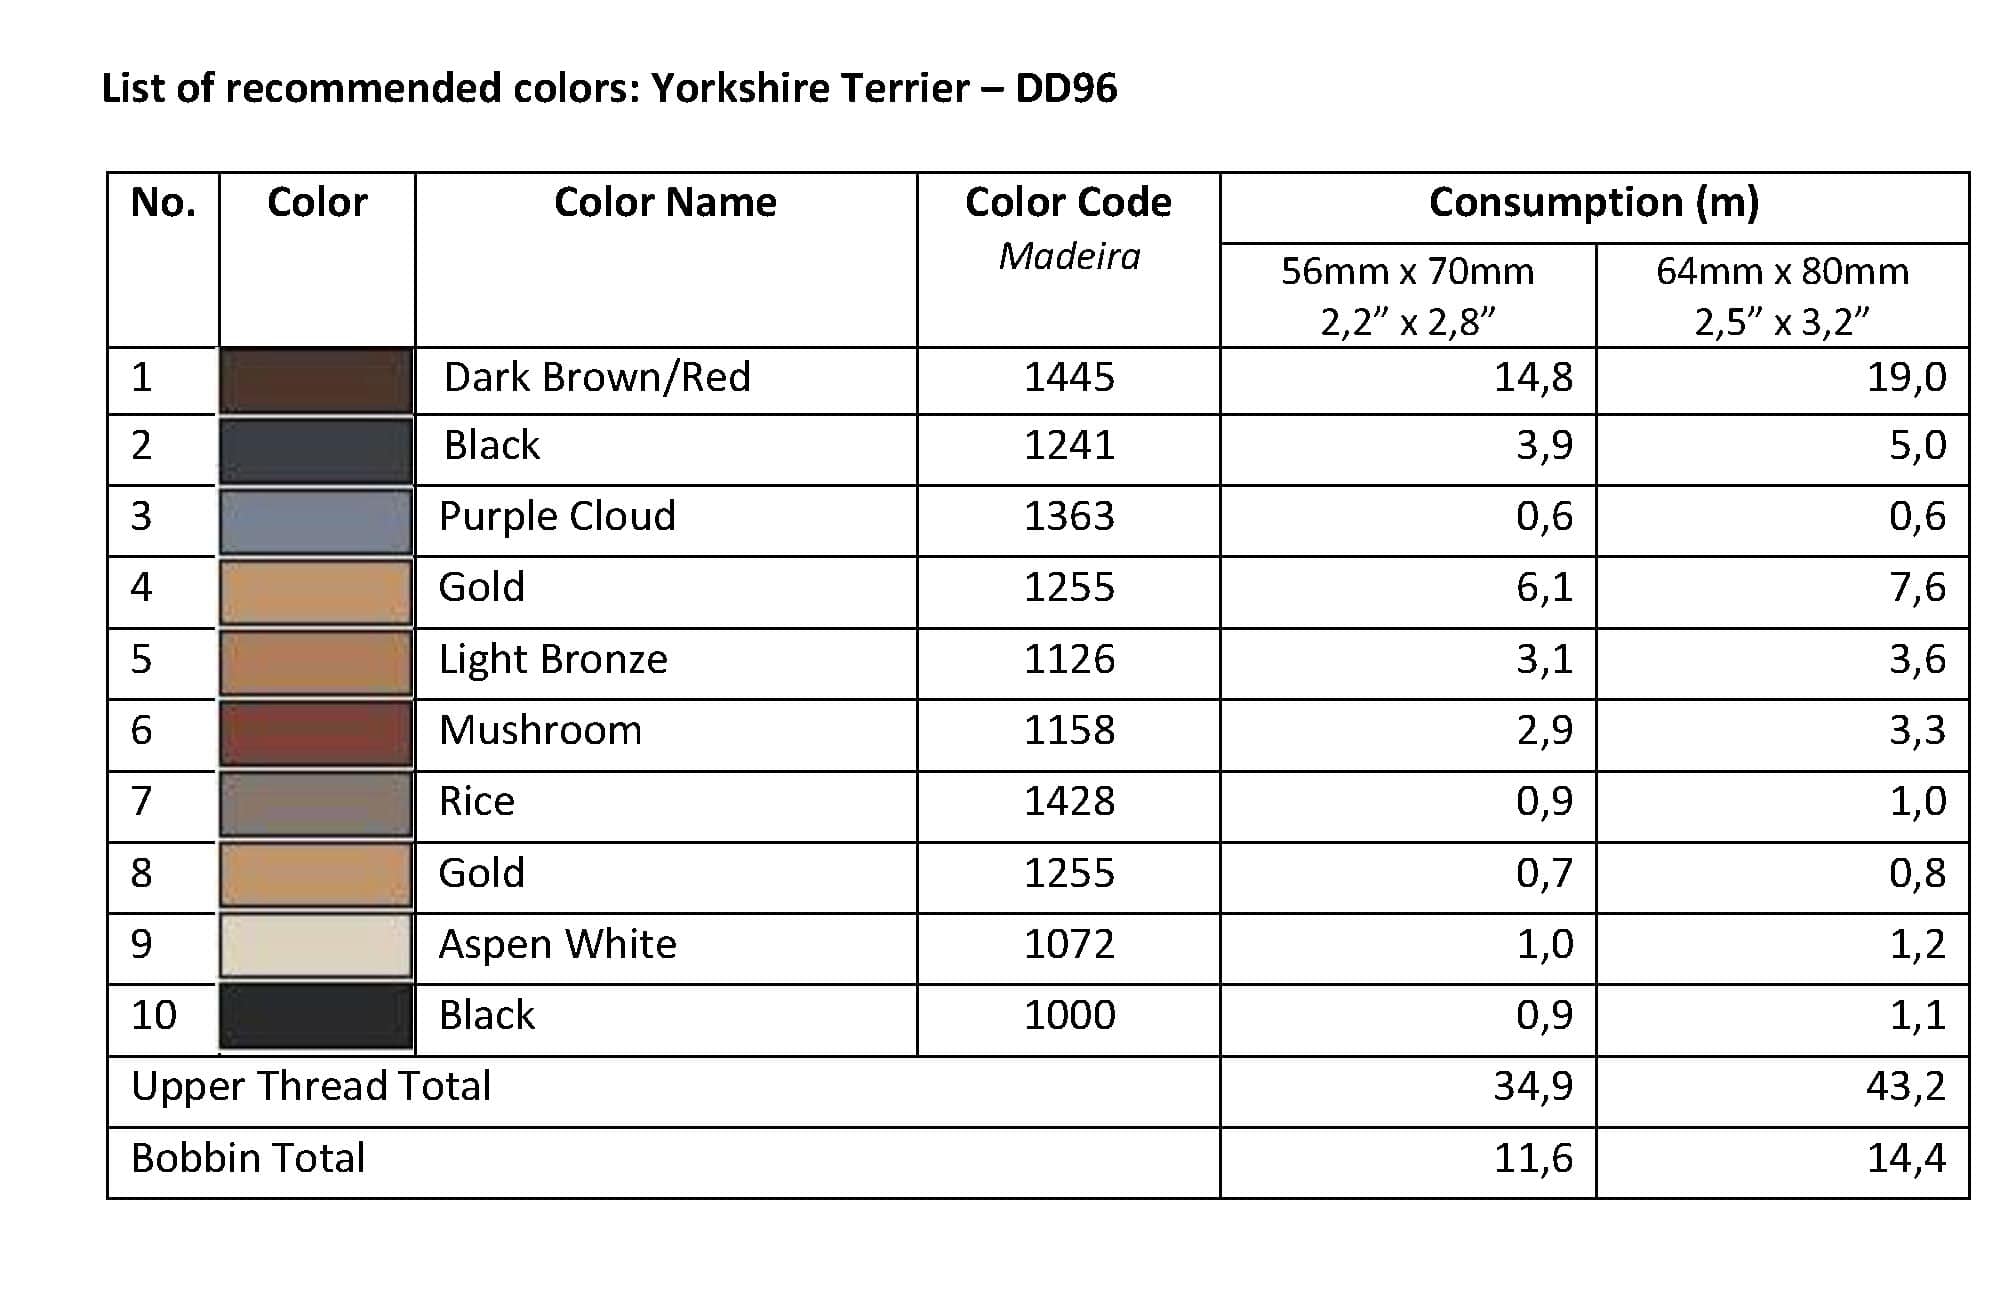 List of Recommended Colors -  Yorkshire Terrier DD96